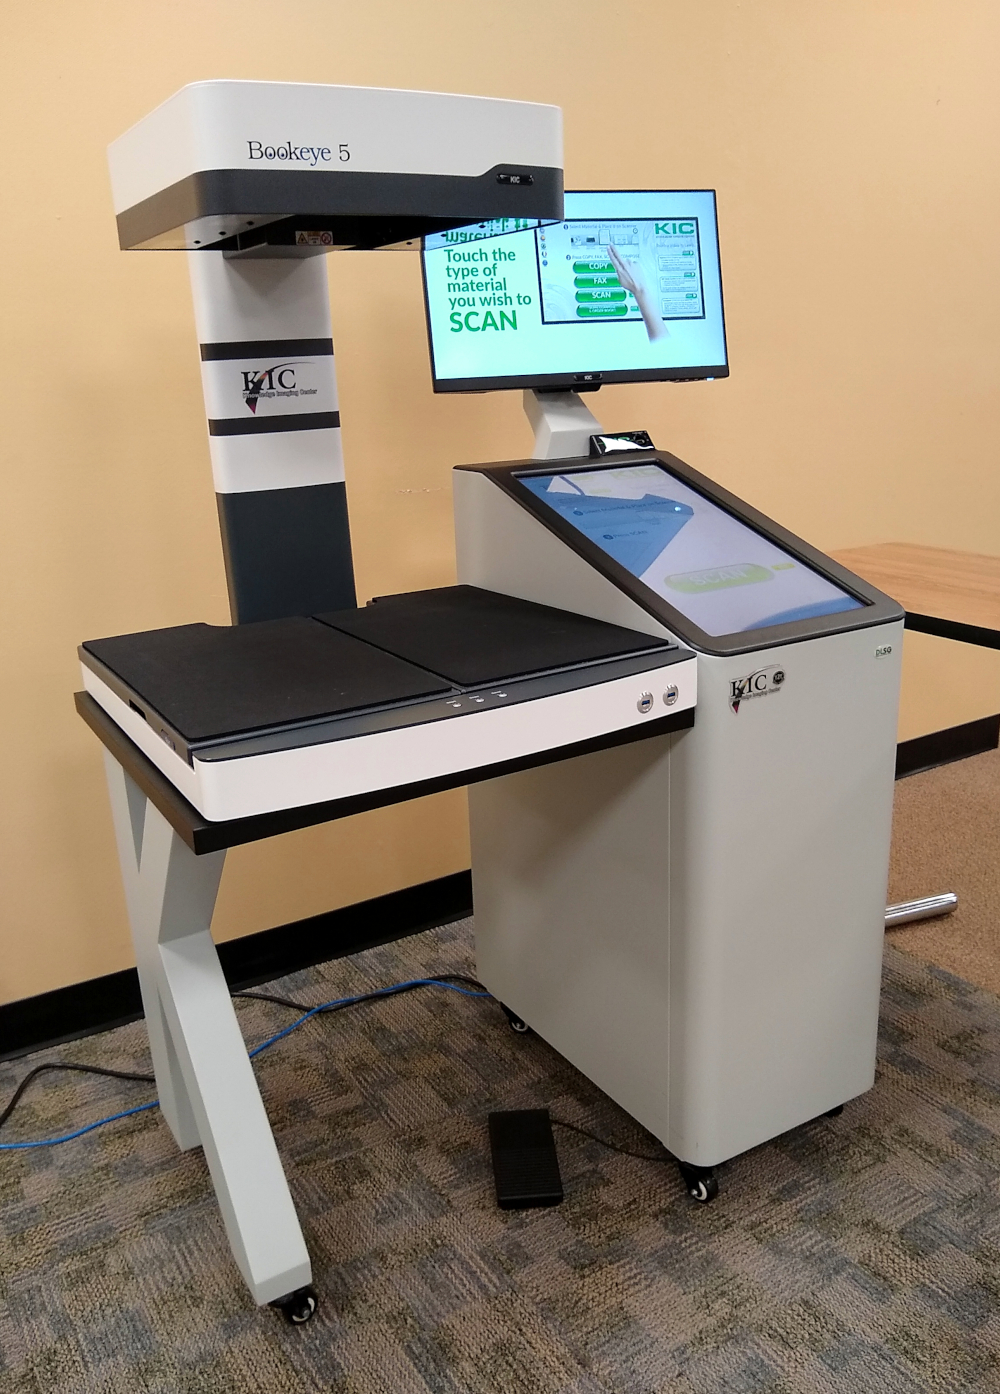 A modern scanner machine for books, with several screens.